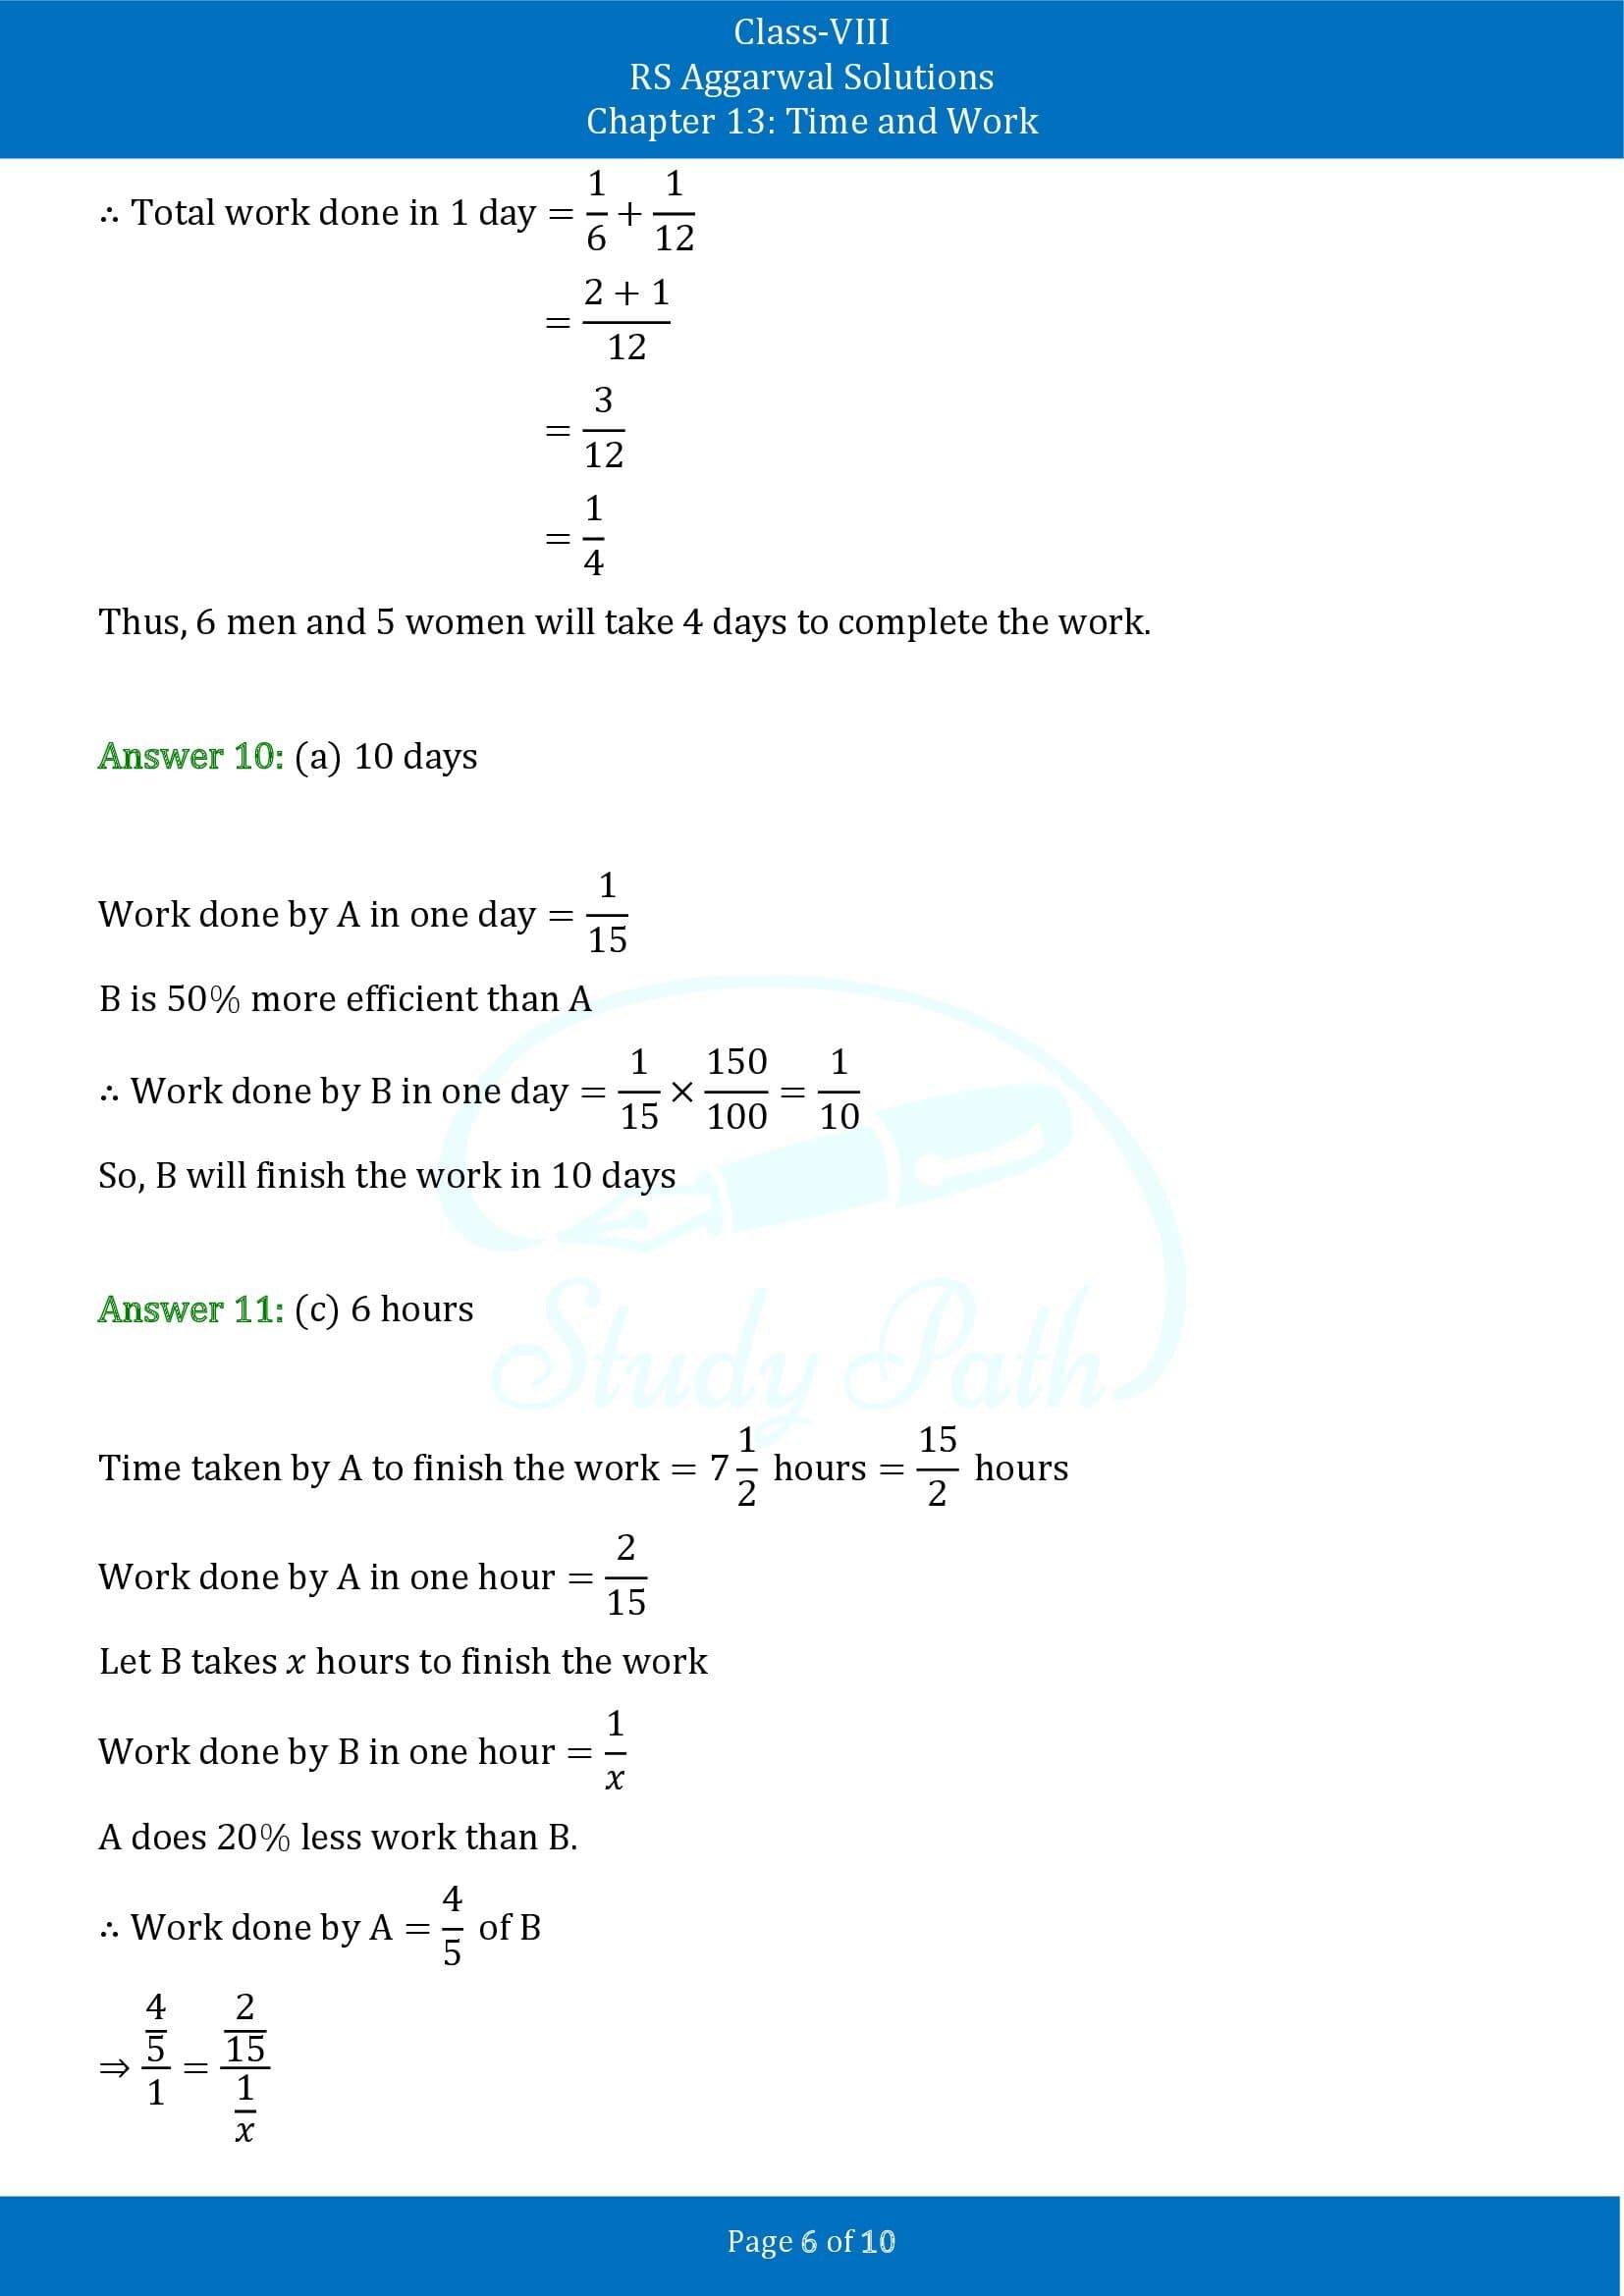 RS Aggarwal Solutions Class 8 Chapter 13 Time and Work Exercise 13B MCQs 00006